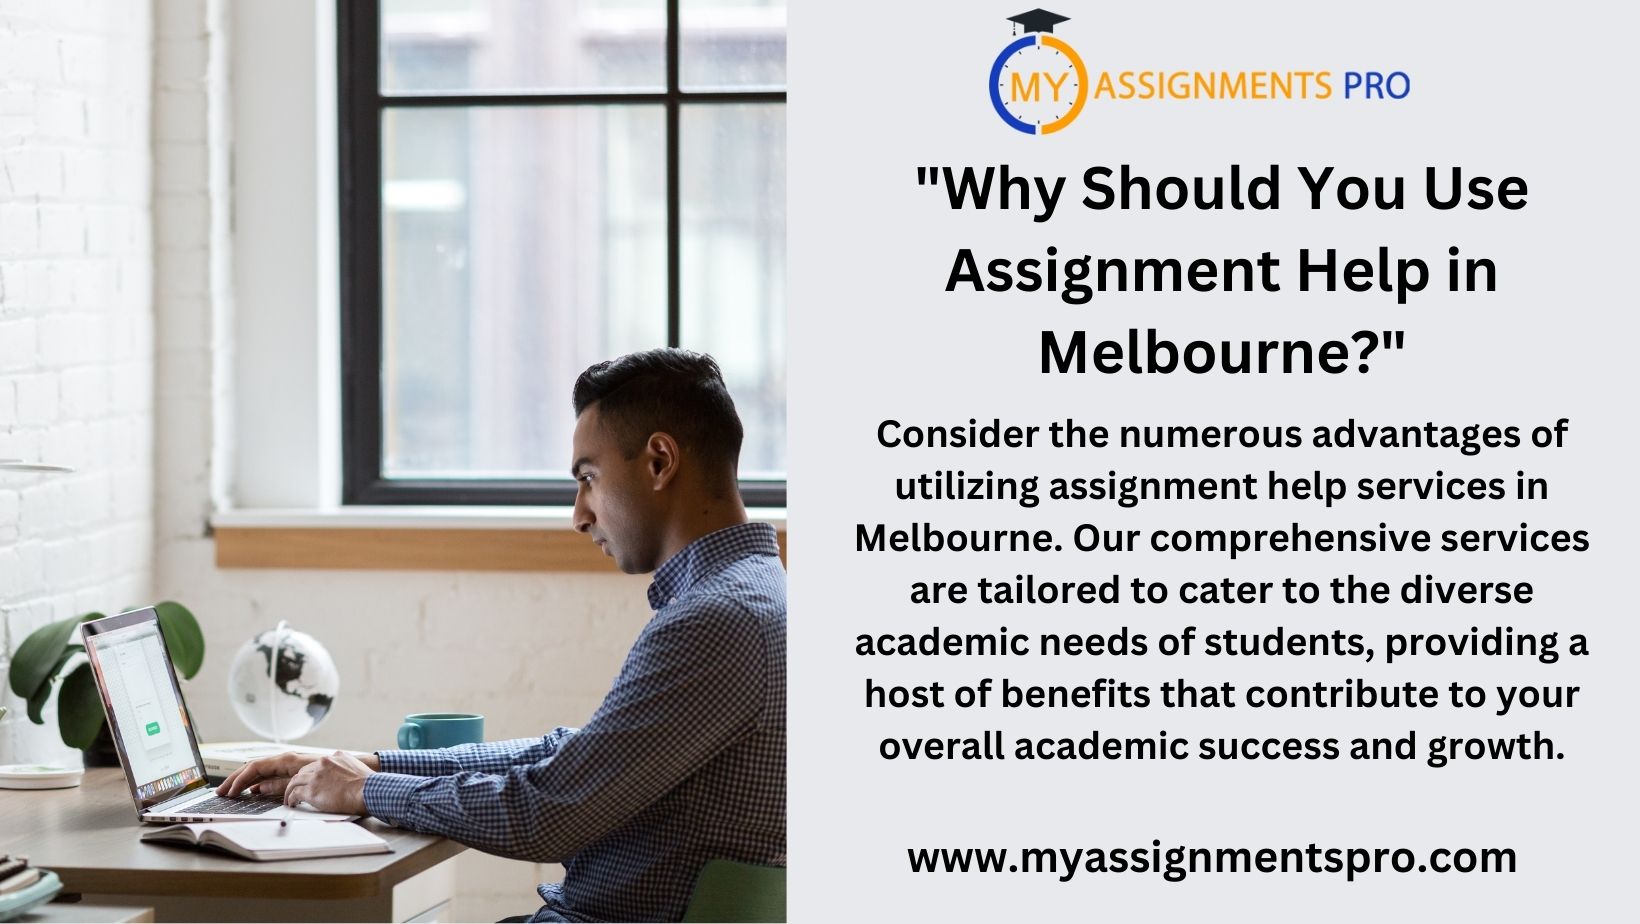 Why Should You Use Assignment Help in Melbourne